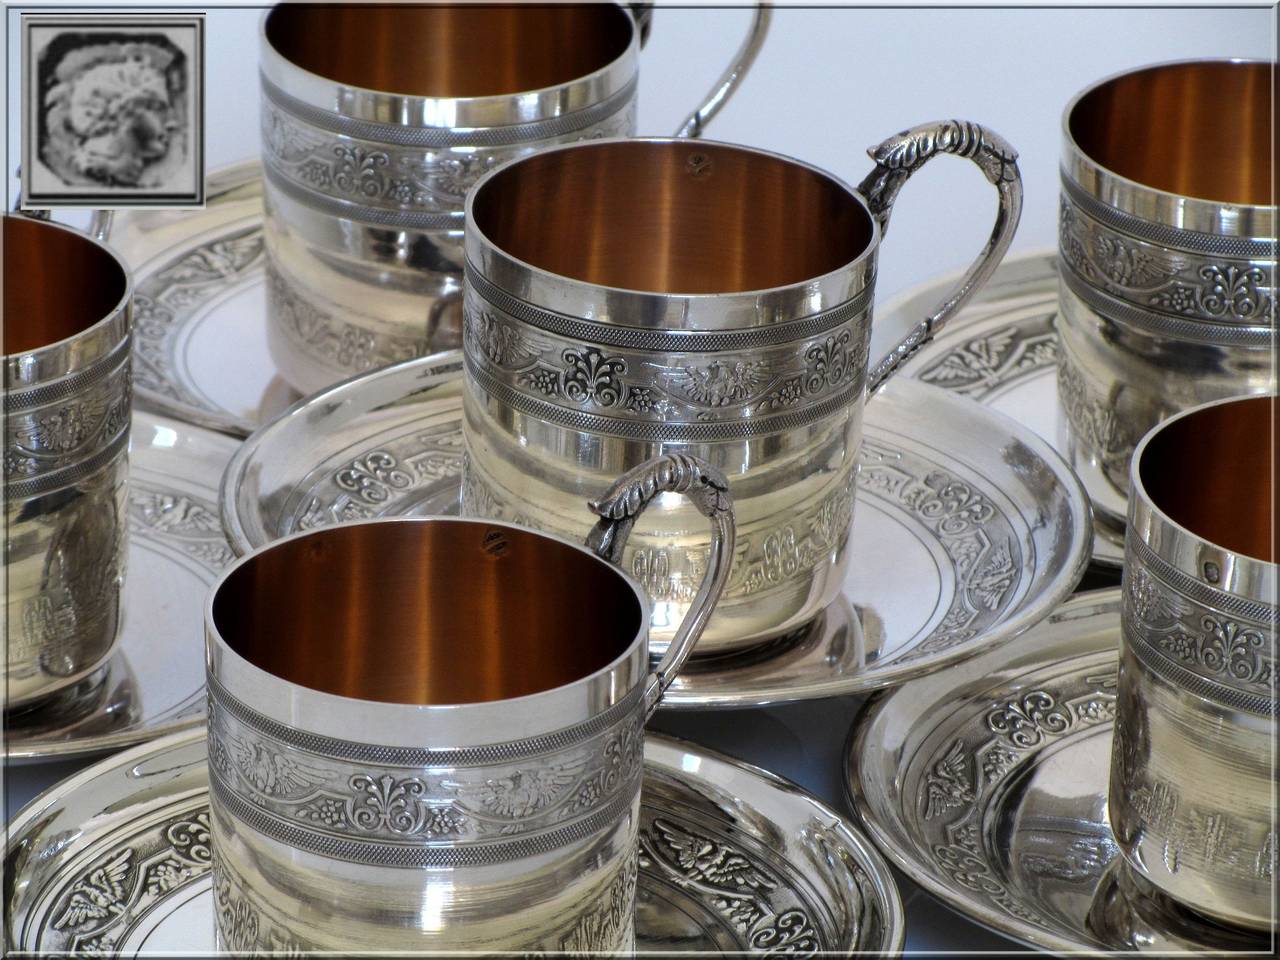 Molle Ornate French Sterling Silver Vermeil Six Coffee Tea Cups with Saucers Imperial Eagles

Head of Minerve 1 st titre for 950/1000 French Sterling Silver Vermeil guarantee

Exceptional and rare service 6 pc of French Sterling Silver